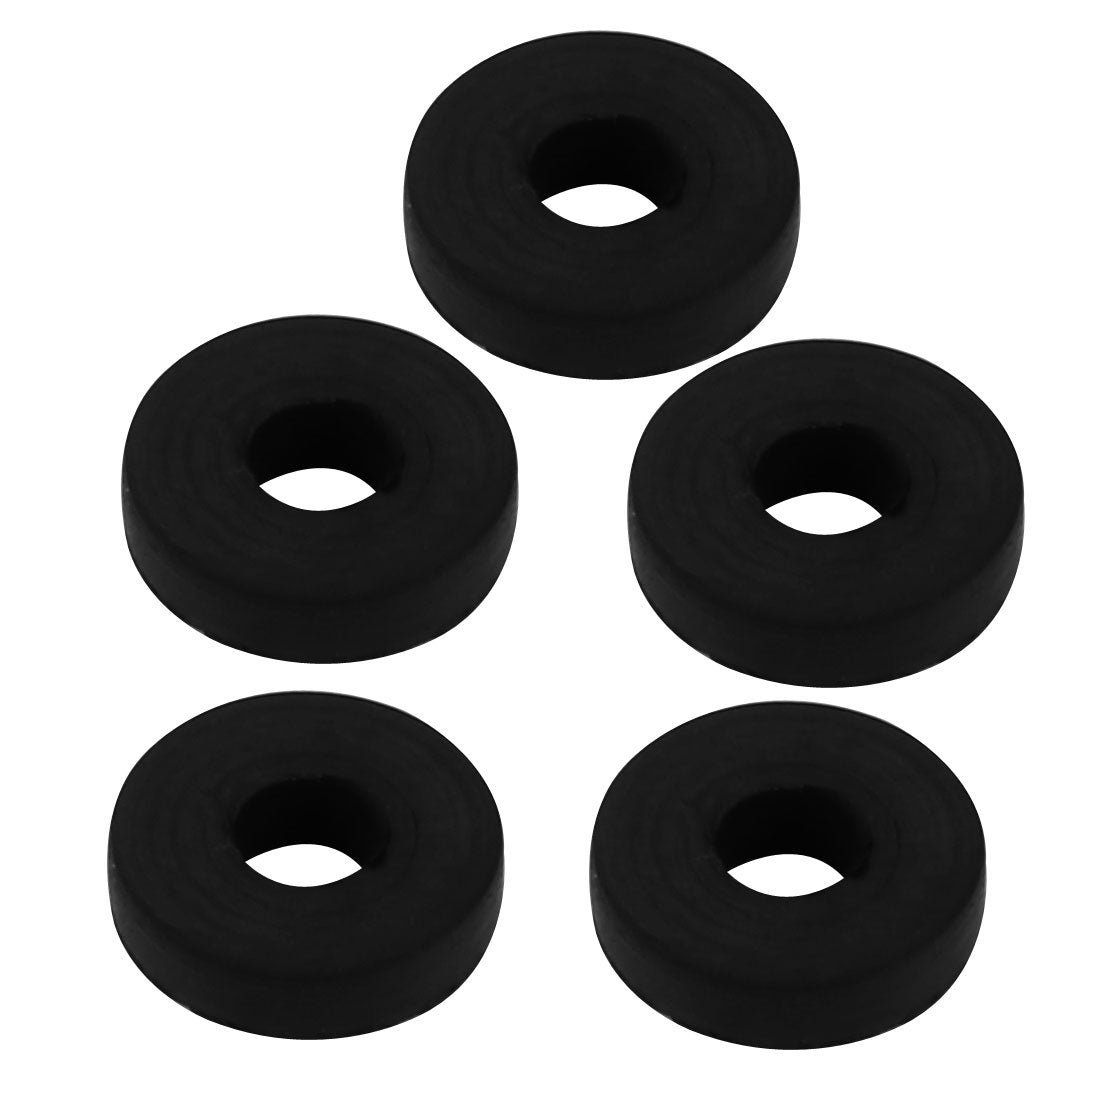 Uxcell Uxcell 5pcs Black Rubber Round Flat Washer Assortment Size 3x8x2mm Flat Washer